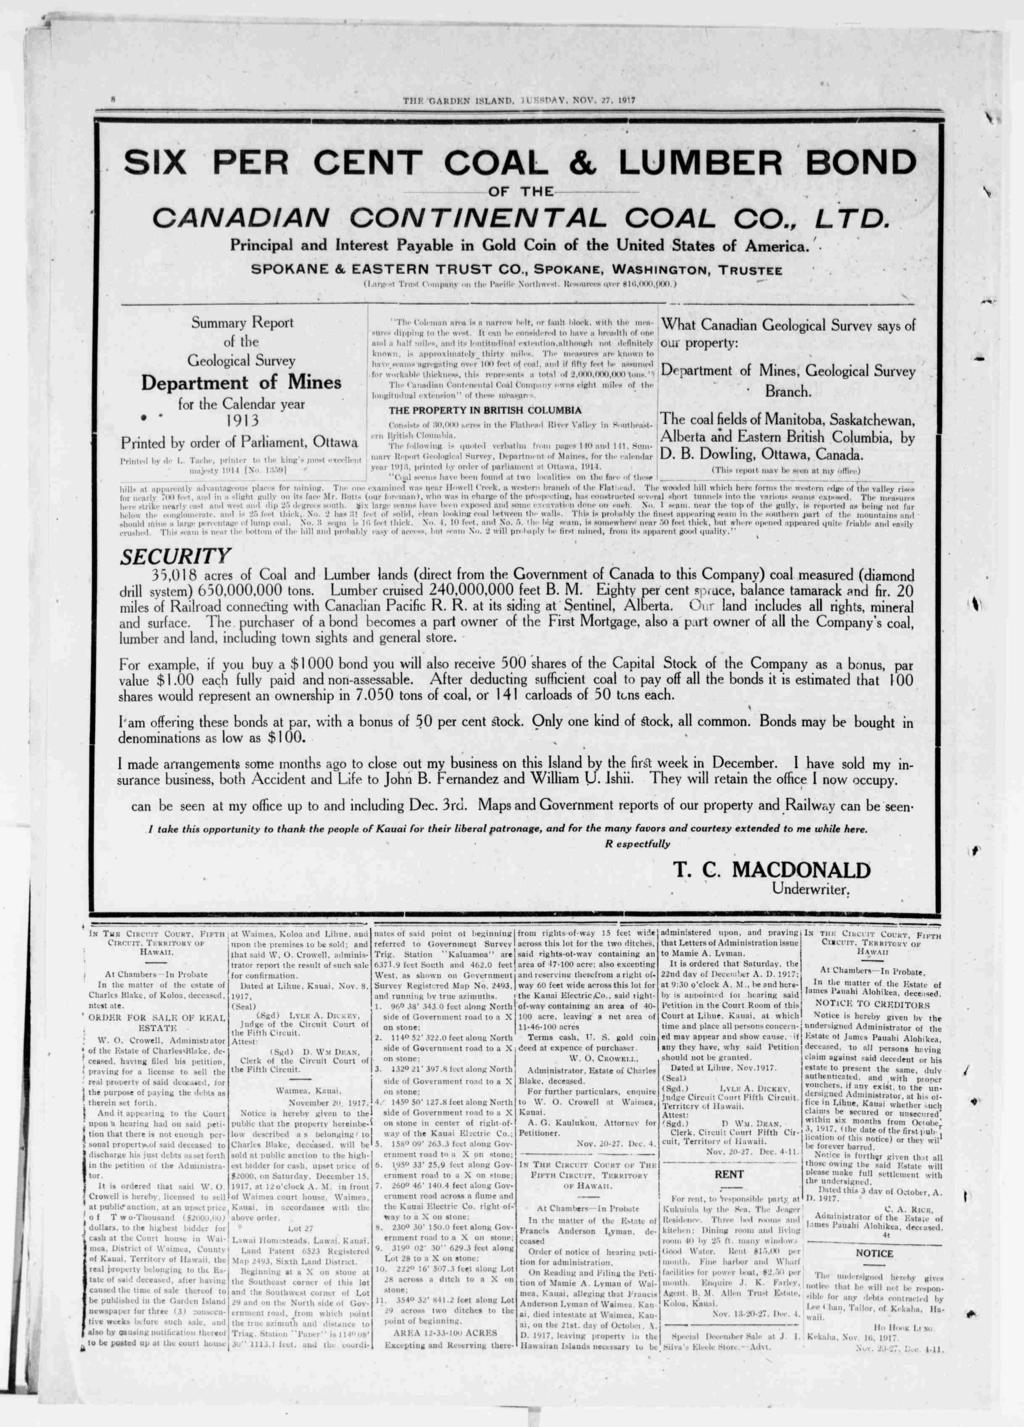 8 T1H GARDEN SLAND, TUESDAY, NOV 27, 1917 SX PER CENT COAL & LUMBER BOND OF THE- - CANADAN CONTNENTAL CCAL CO, LTD Prncpal and nterest Payable n Gold Con of the Unted States of Amerca :: SPOKANE &